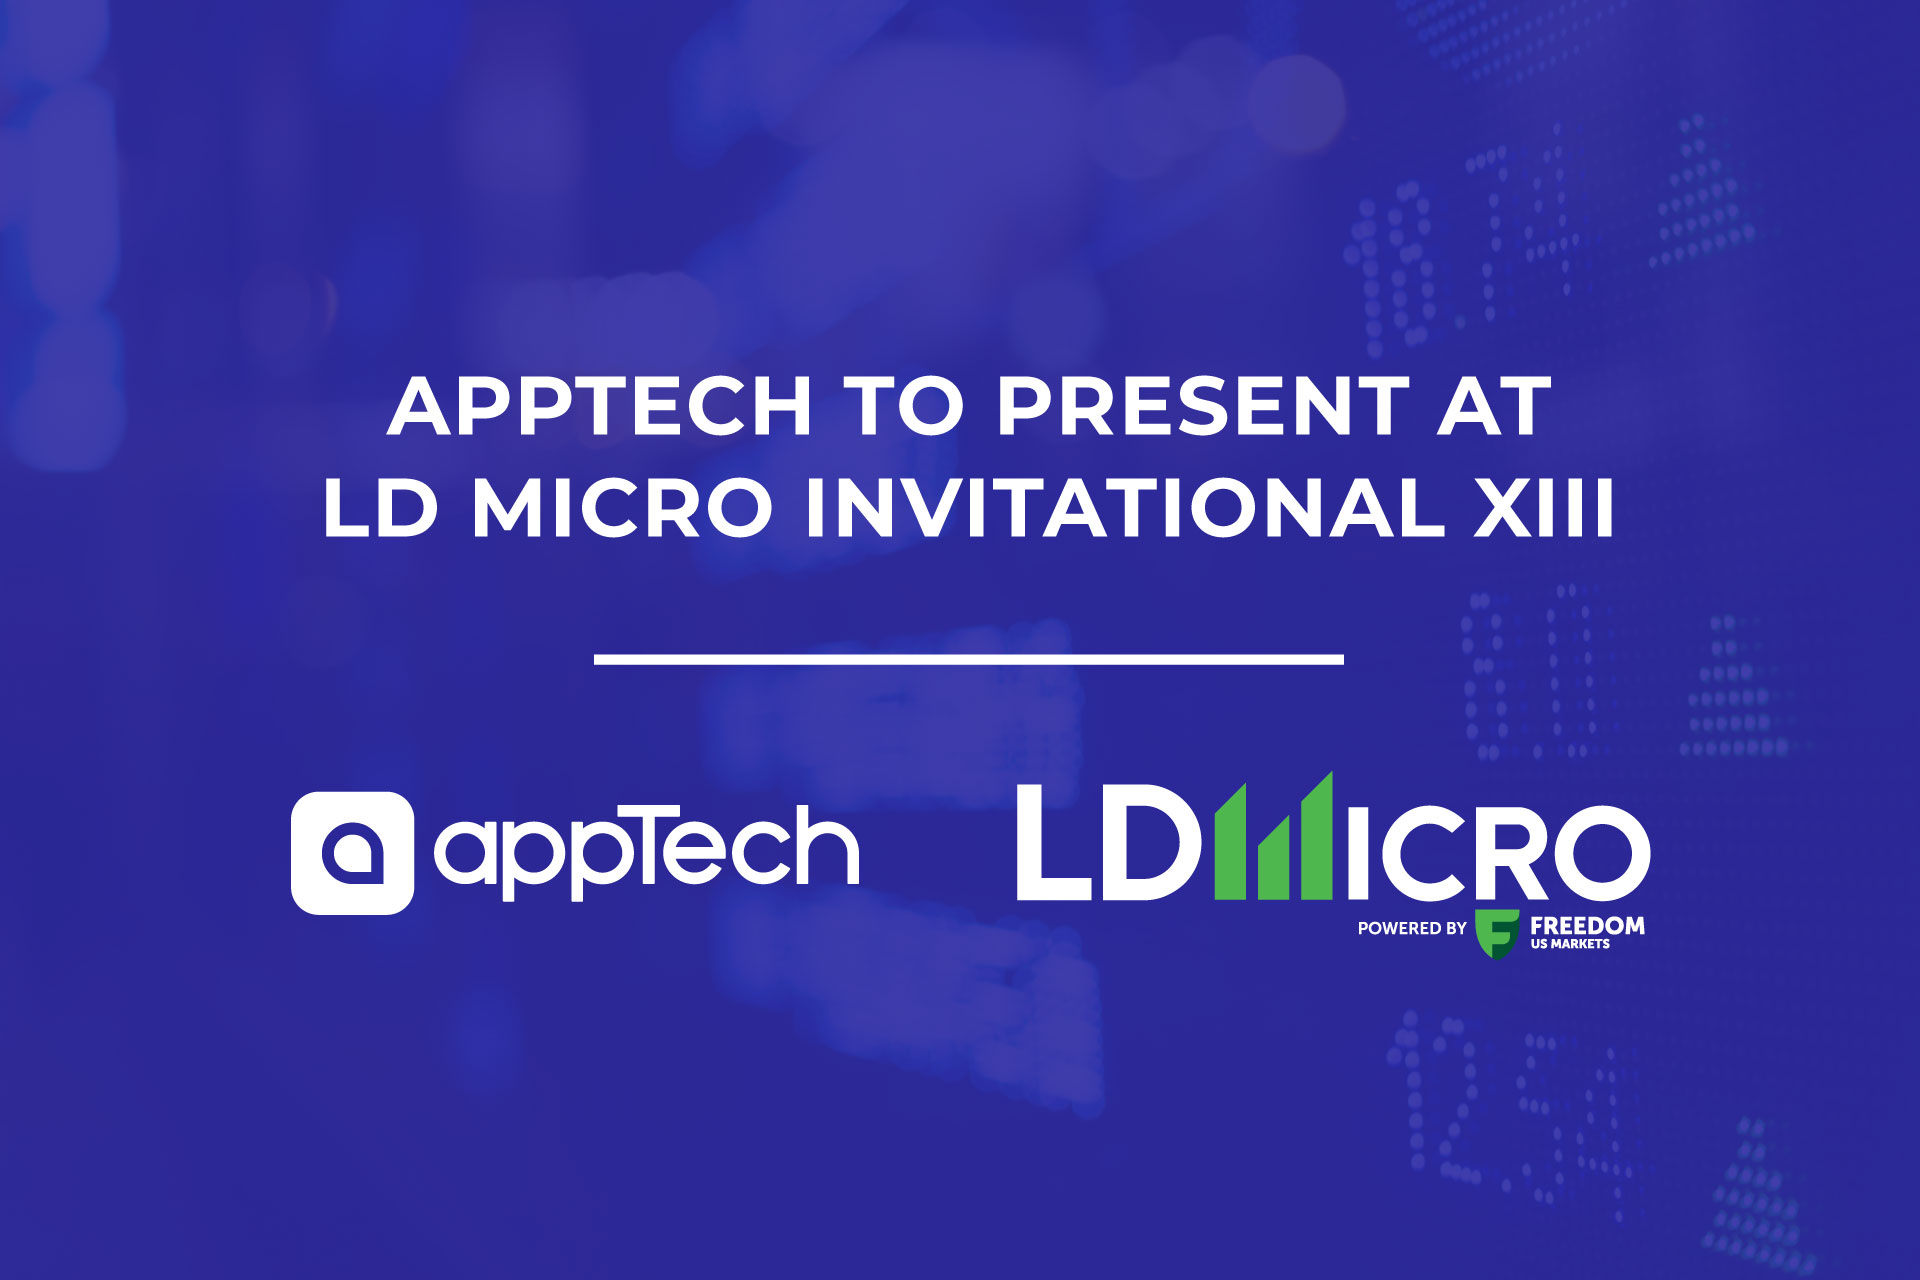 APPTECH PRESENTS AT LD MICRO INVITATIONAL XIII